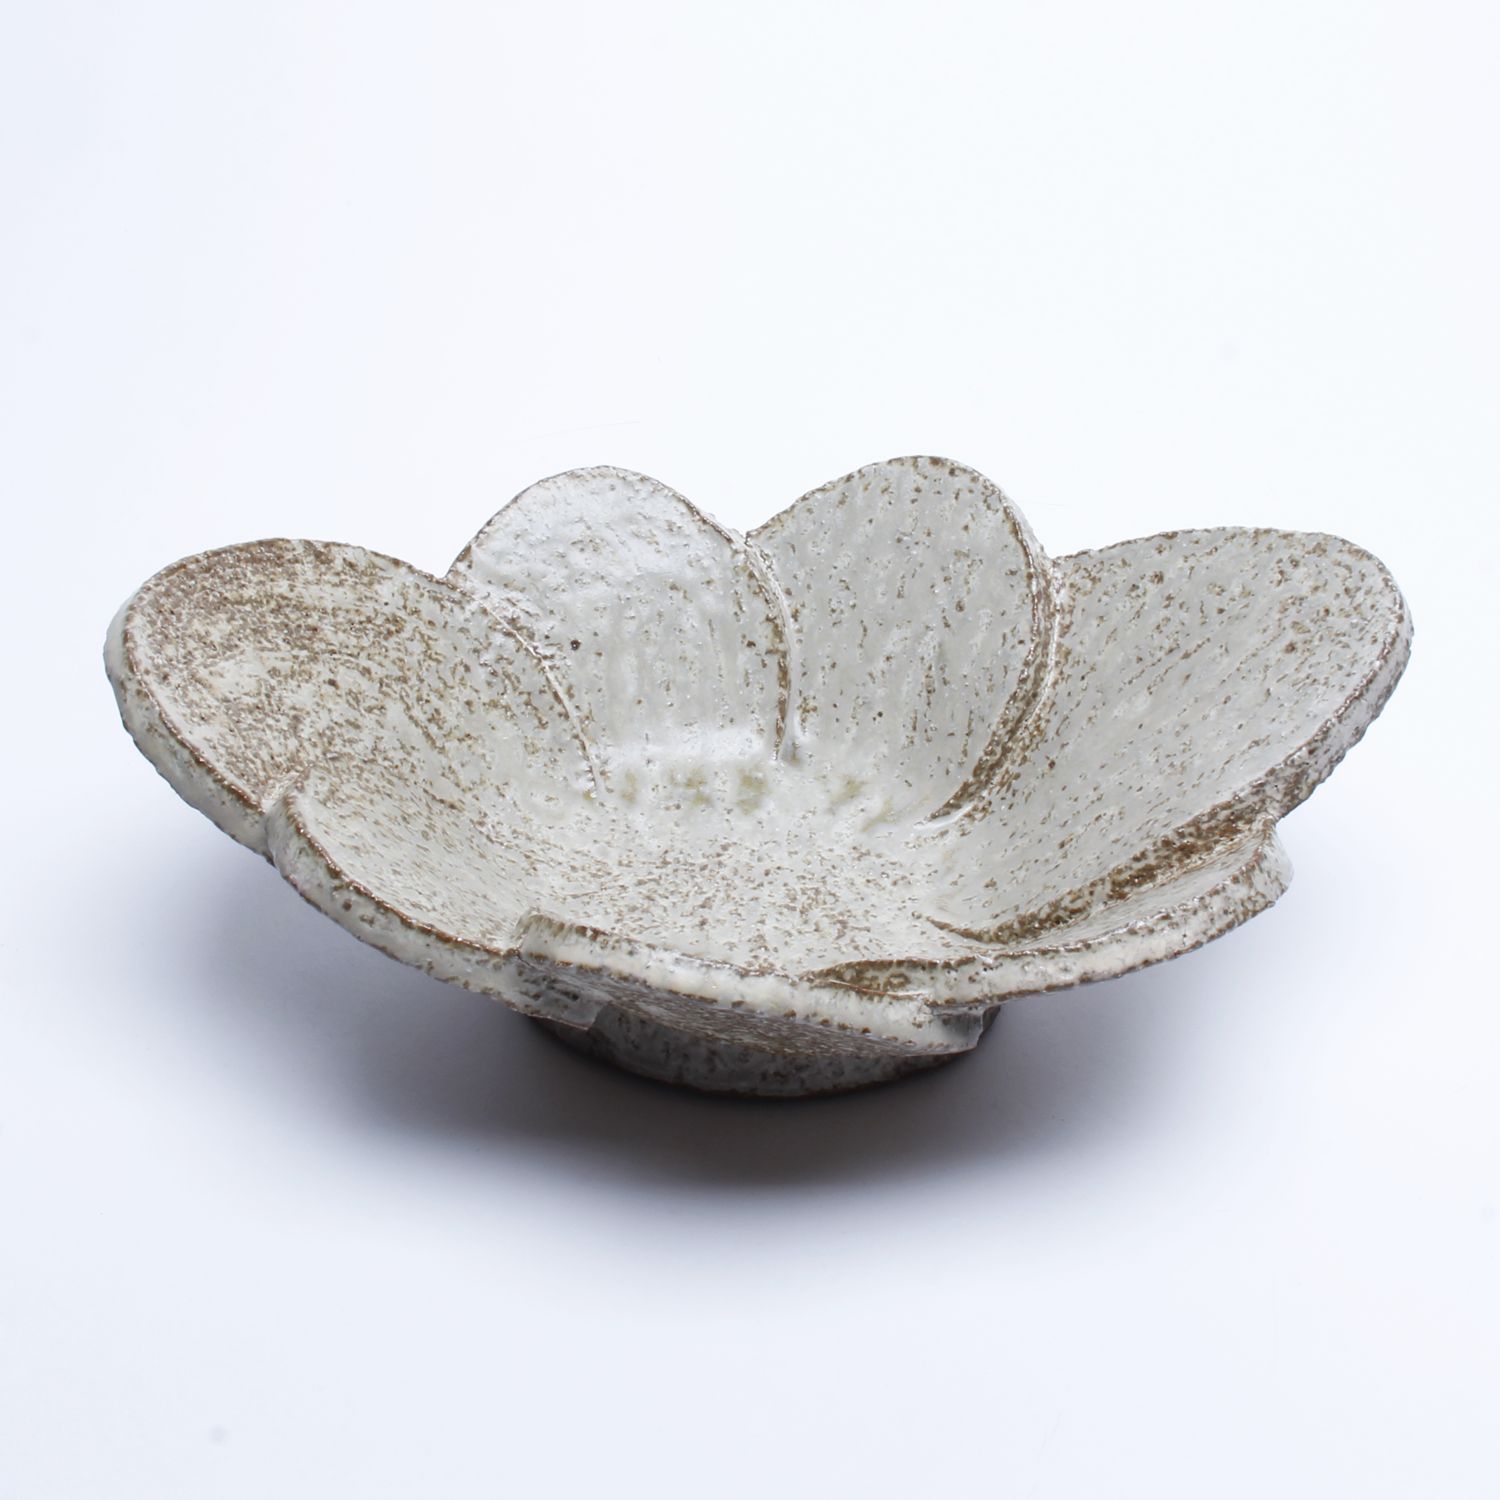 Bruce Cochrane: Overlapping Tan Oval Bowl Product Image 5 of 5